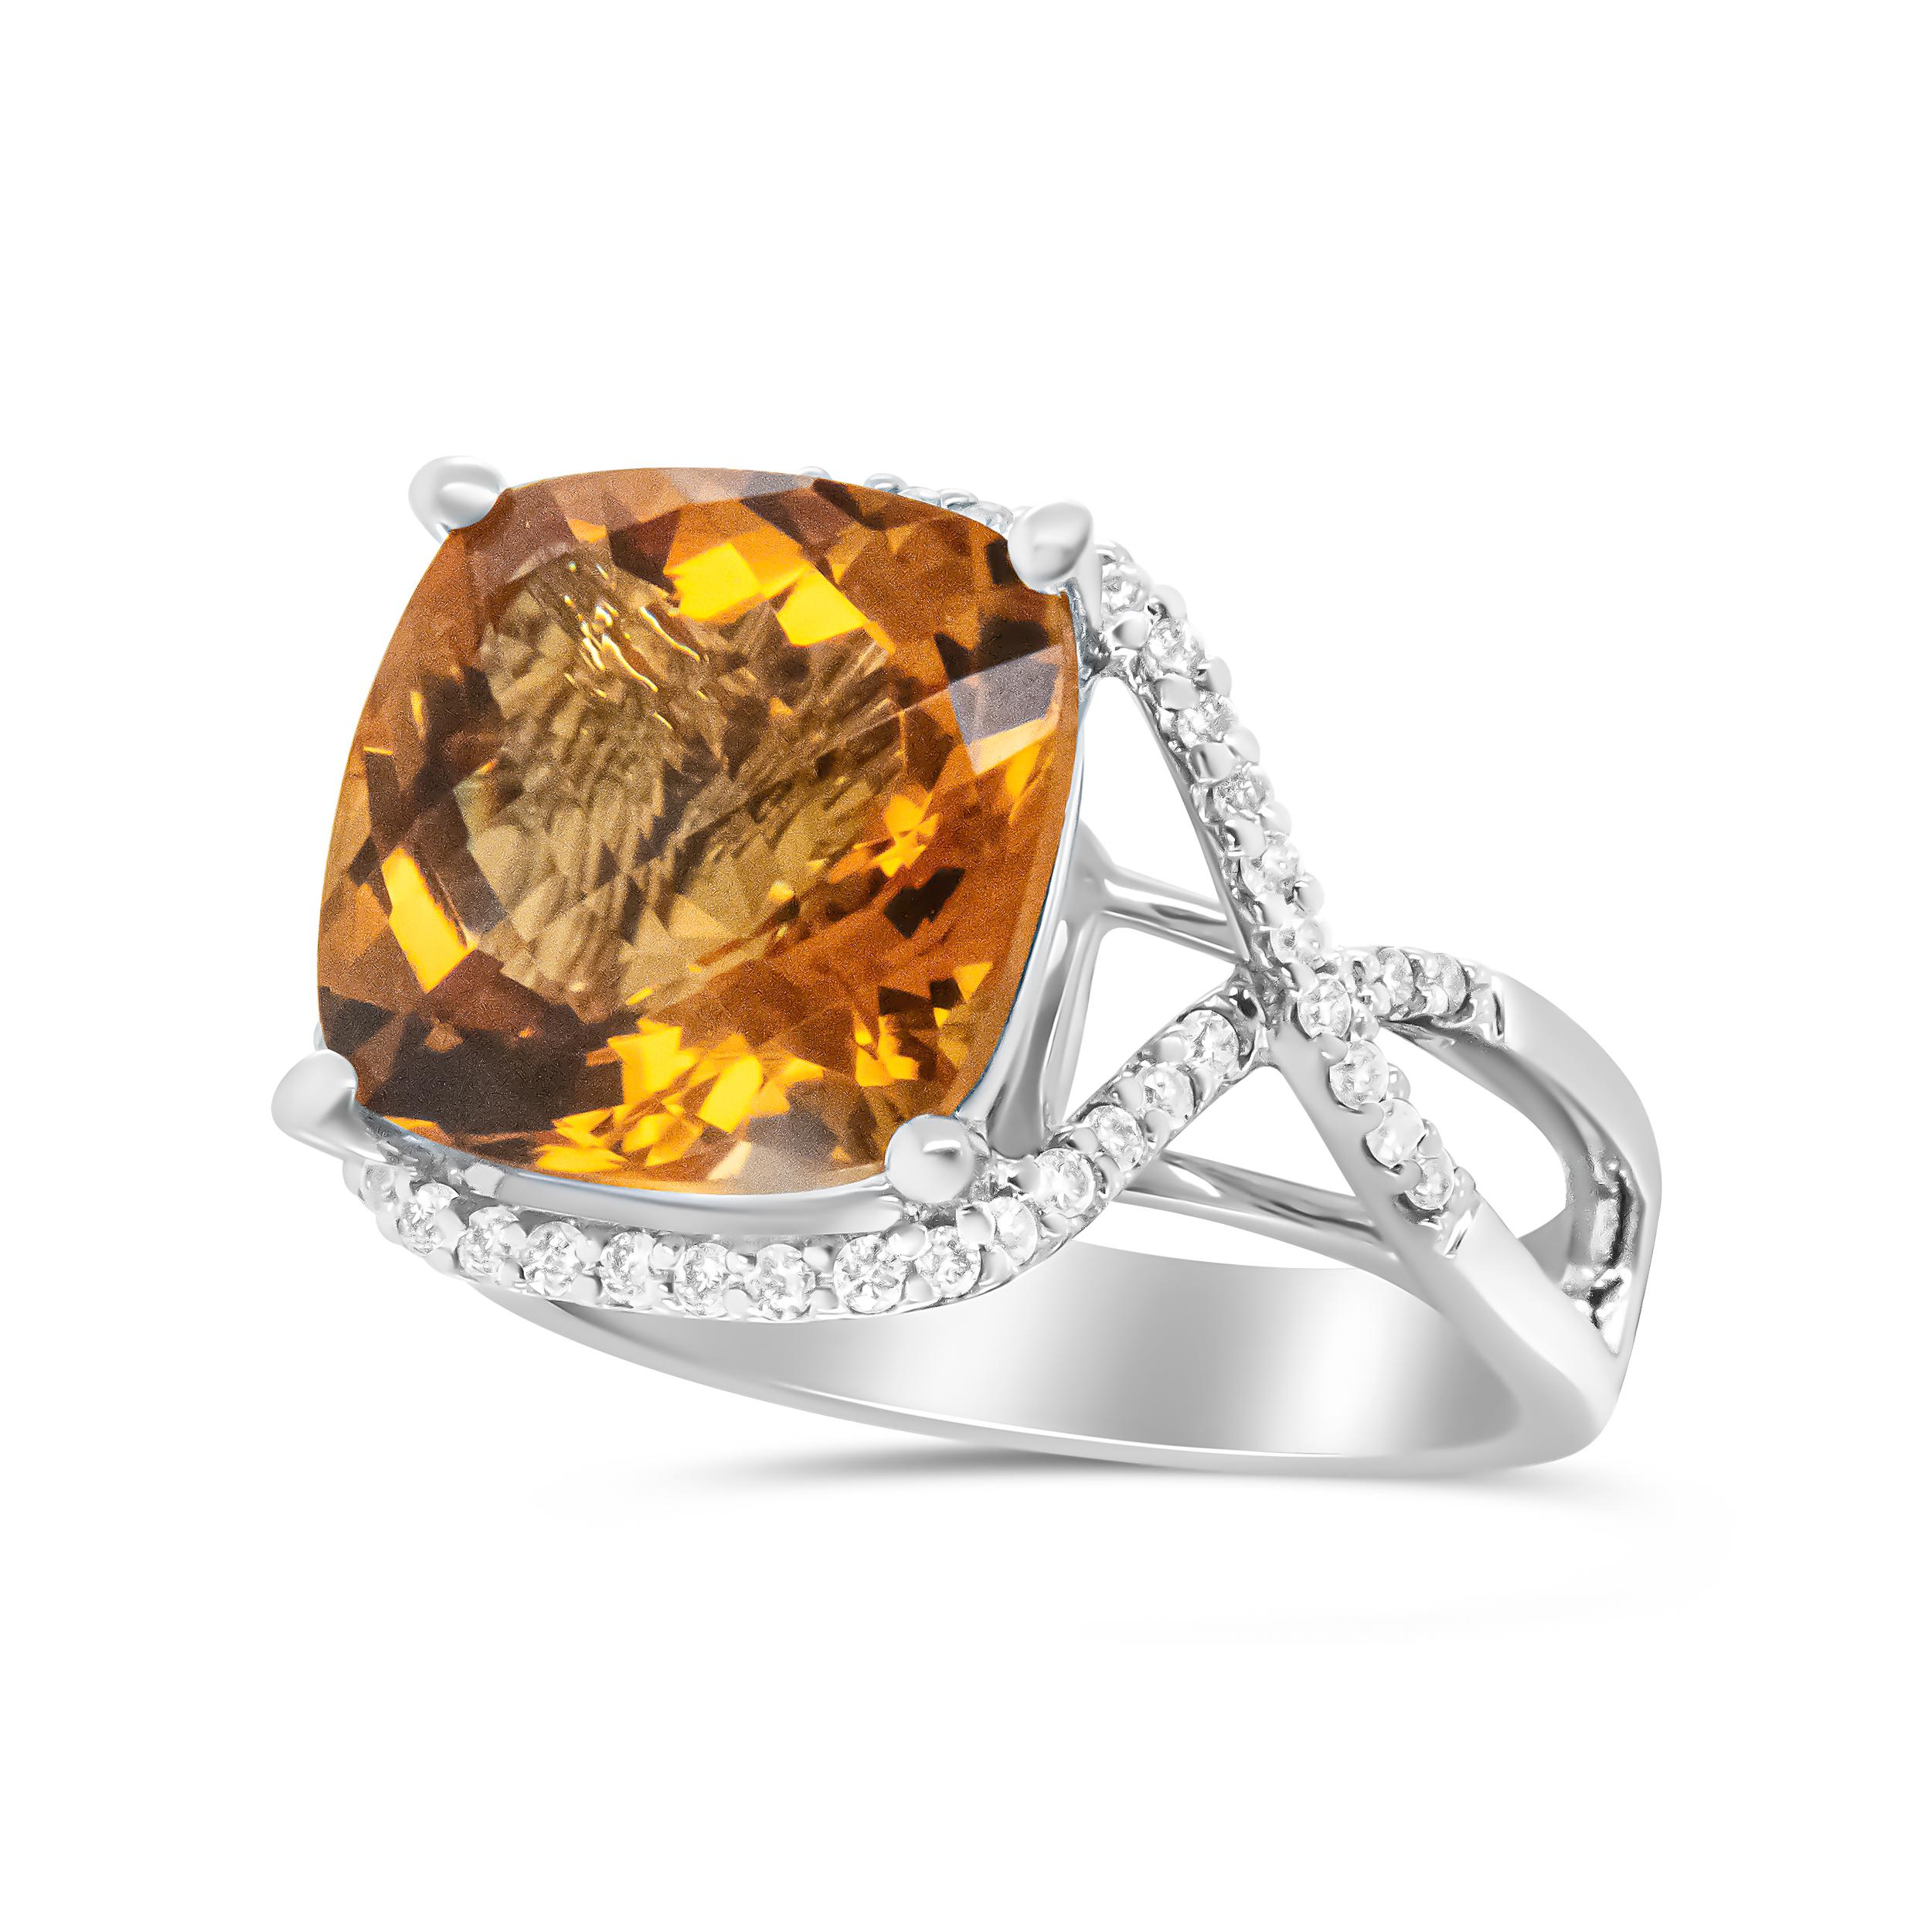 Contemporary 14K White Gold Cushion Cut Yellow Citrine Gemstone & 1/3 Cttw Round Diamond Ring For Sale